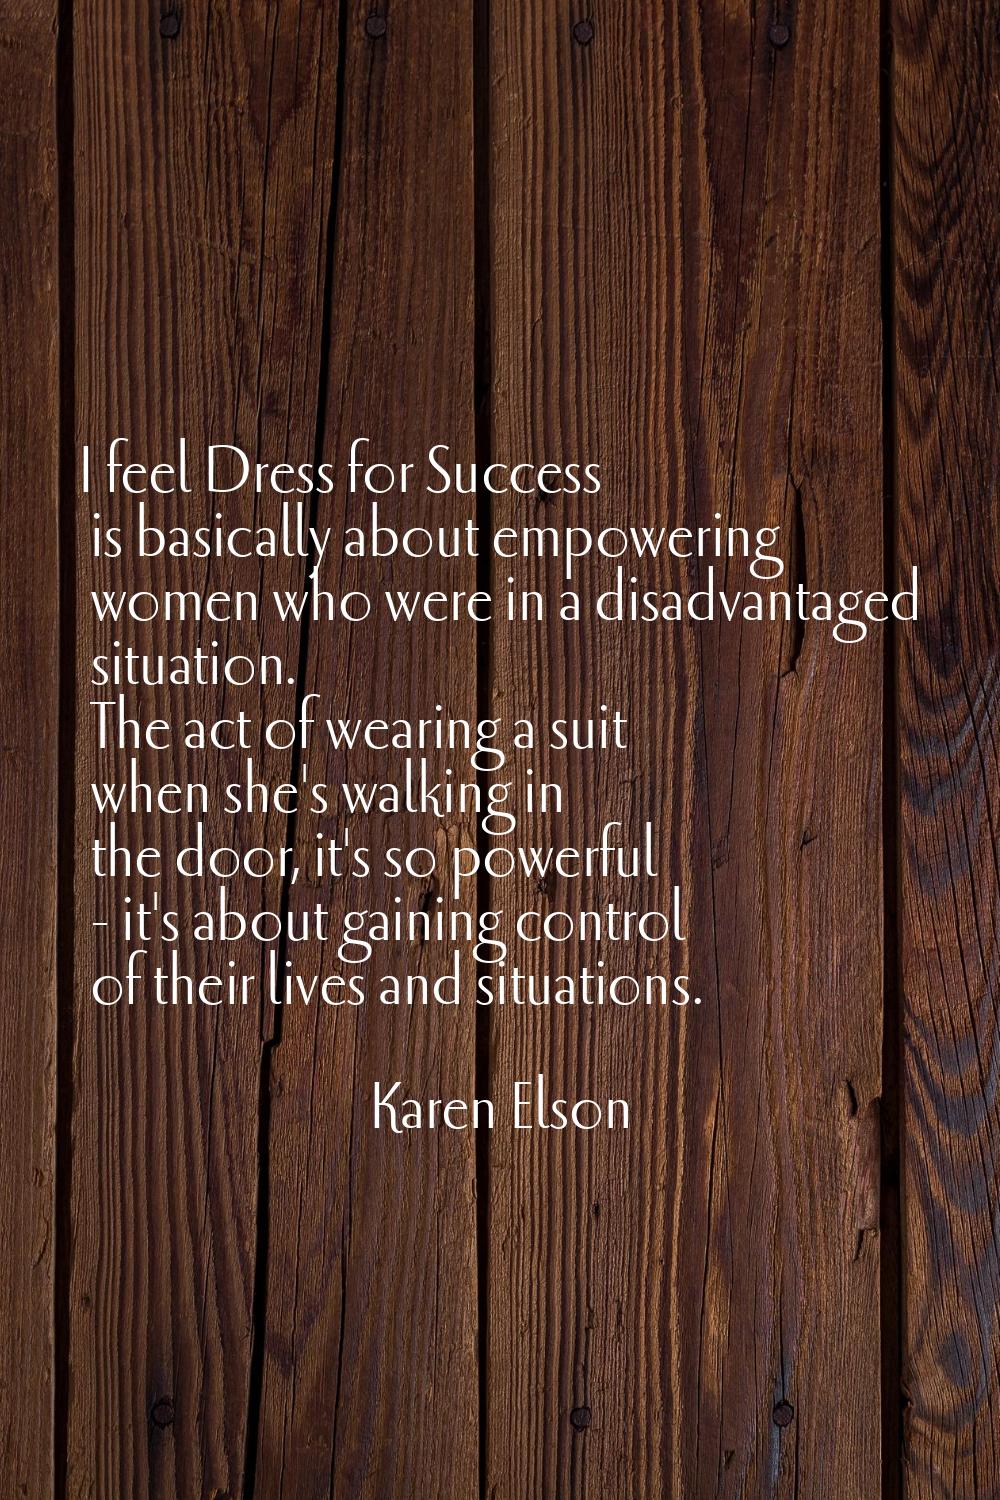 I feel Dress for Success is basically about empowering women who were in a disadvantaged situation.